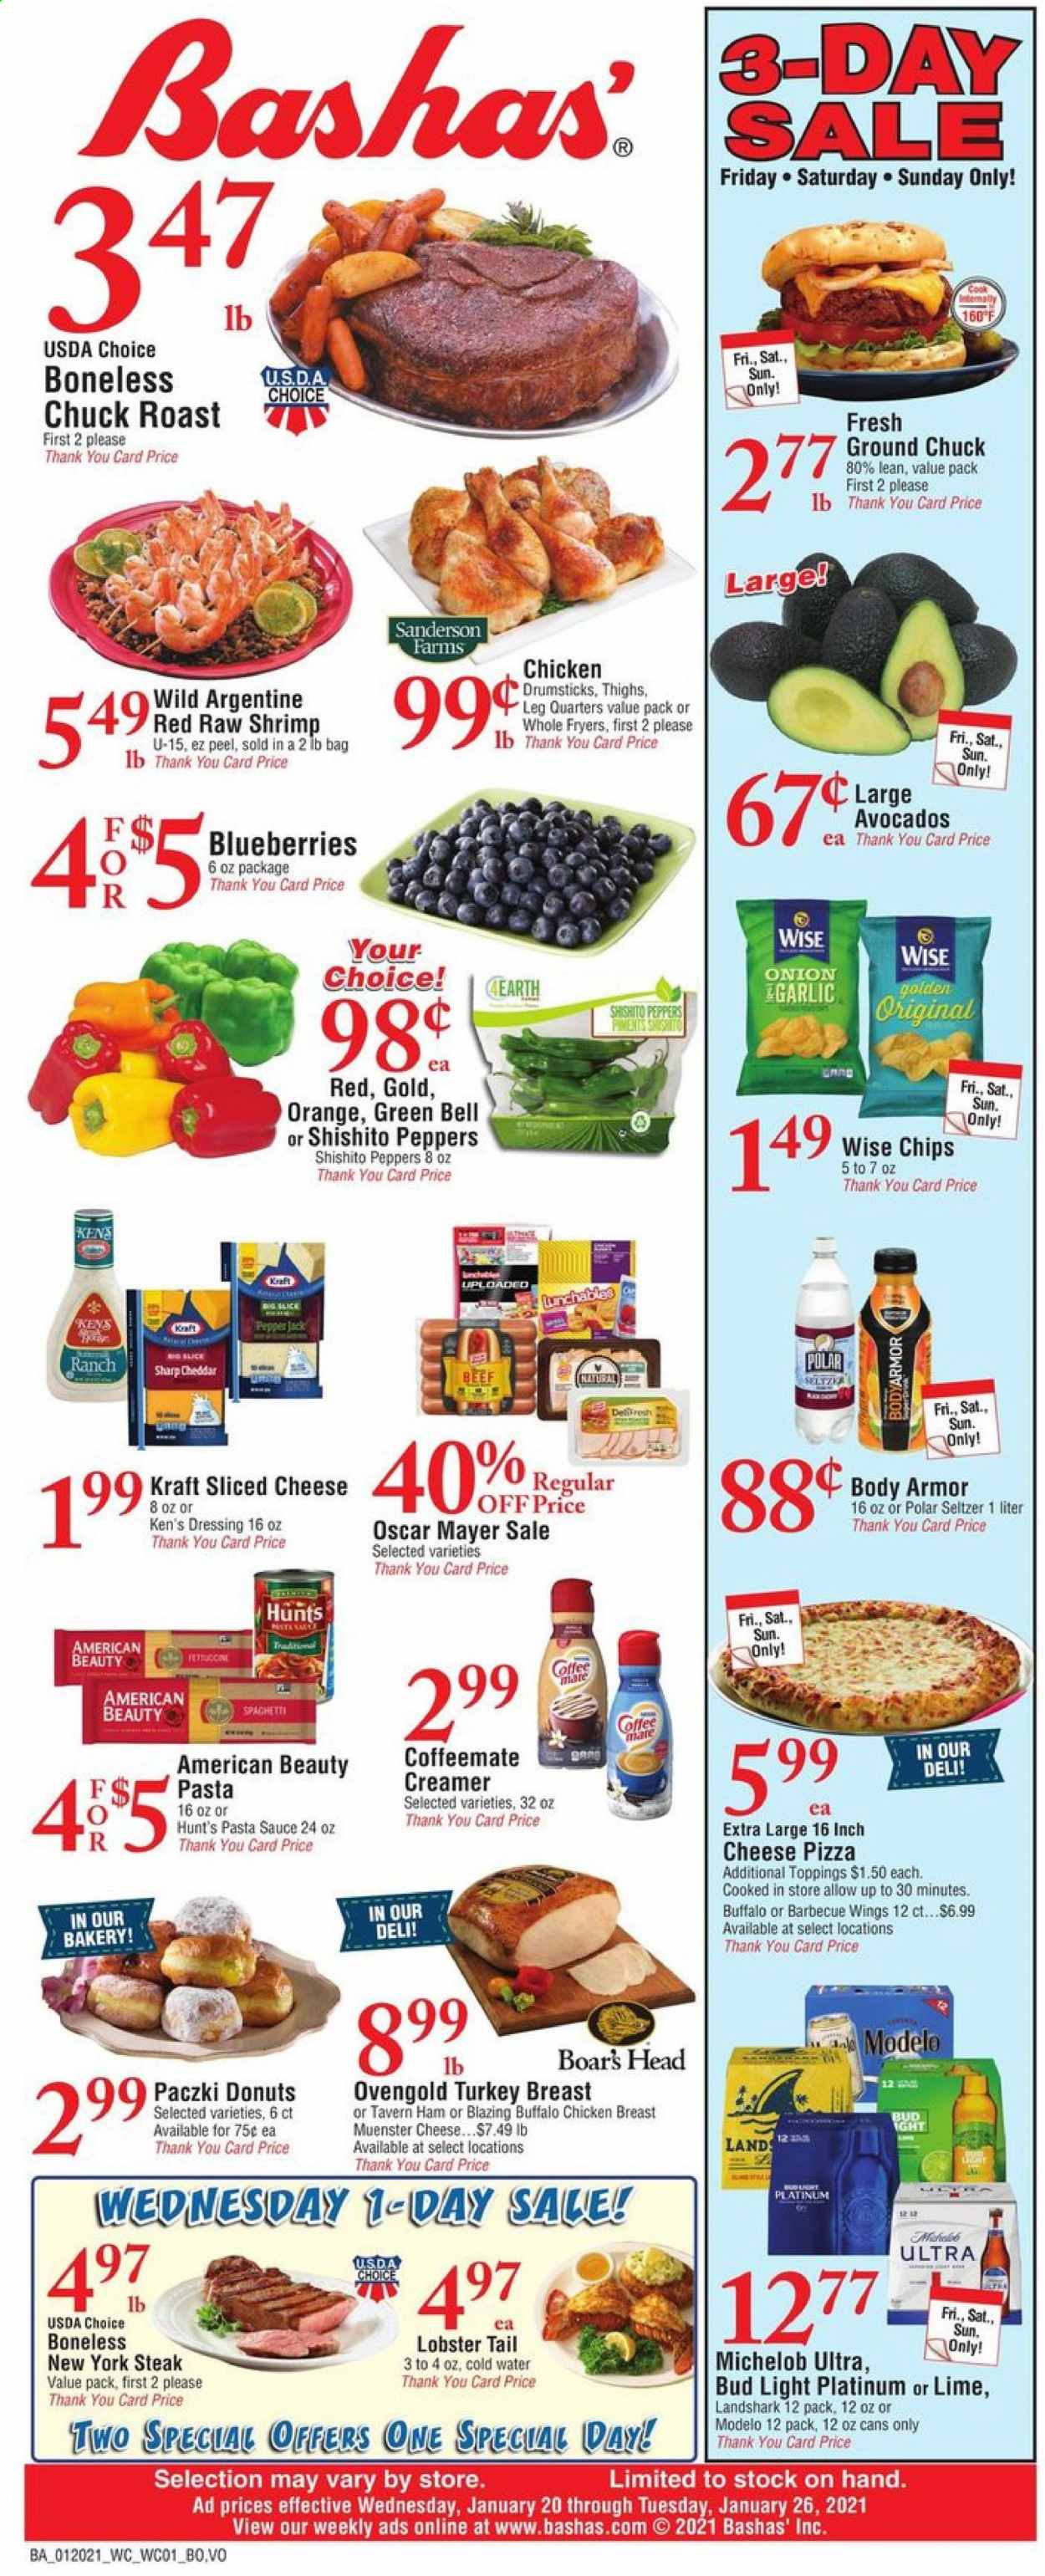 thumbnail - Bashas' Flyer - 01/20/2021 - 01/26/2021 - Sales products - blueberries, donut, paczki, lobster, lobster tail, shrimps, pizza, sauce, Kraft®, ham, Oscar Mayer, sliced cheese, cheddar, Pepper Jack cheese, cheese, Münster cheese, creamer, chips, garlic, pasta sauce, dressing, seltzer water, coffee, beer, Michelob, Bud Light, Modelo, turkey breast, chicken breasts, chicken drumsticks, beef meat, ground chuck, steak, chuck roast, avocado. Page 1.